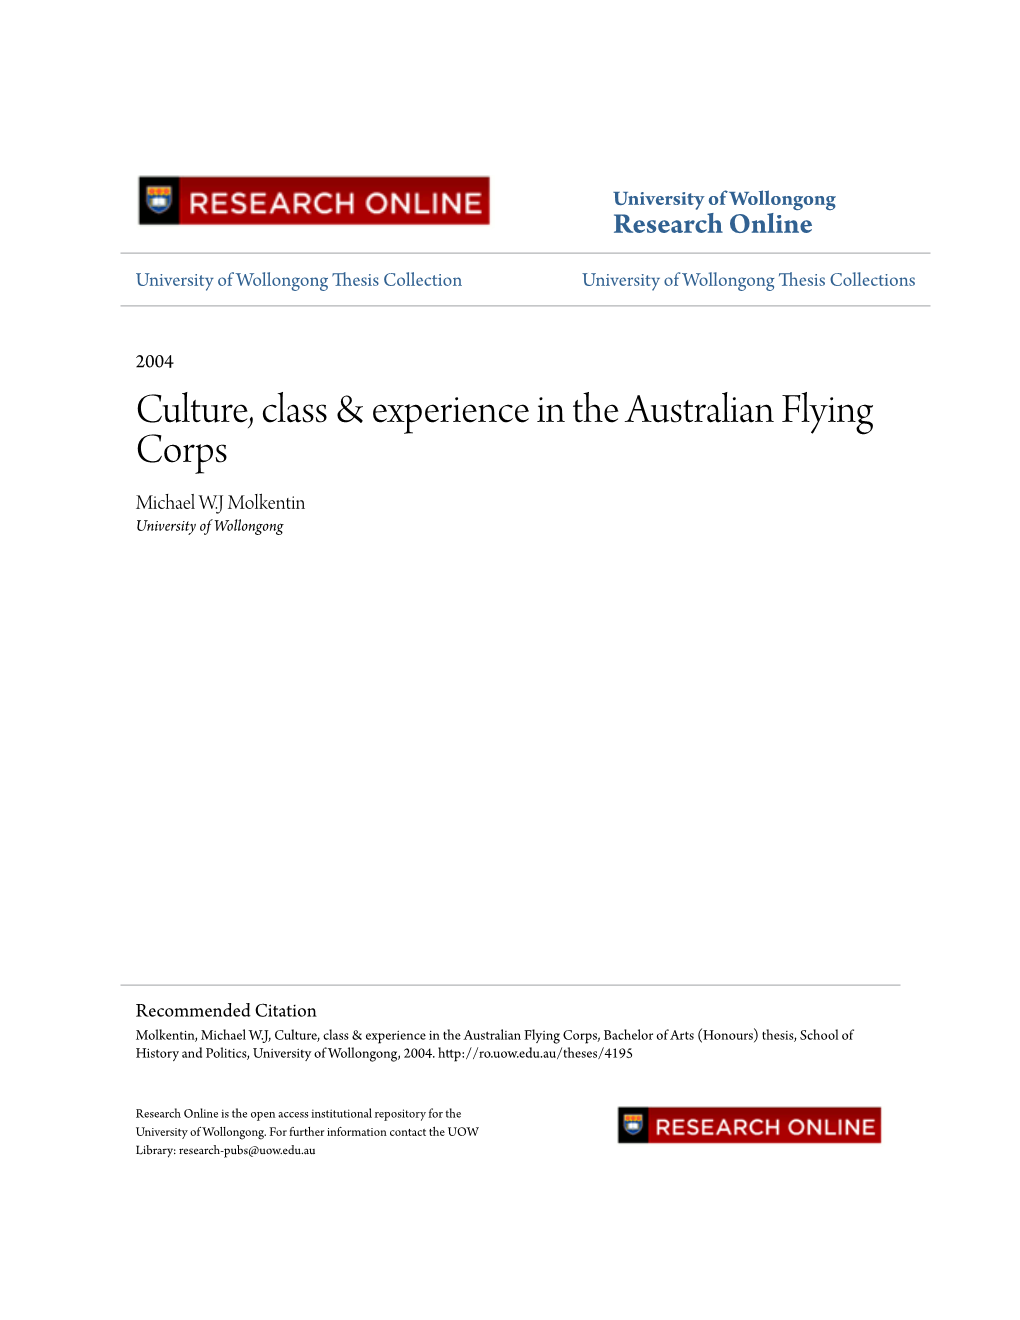 Culture, Class & Experience in the Australian Flying Corps